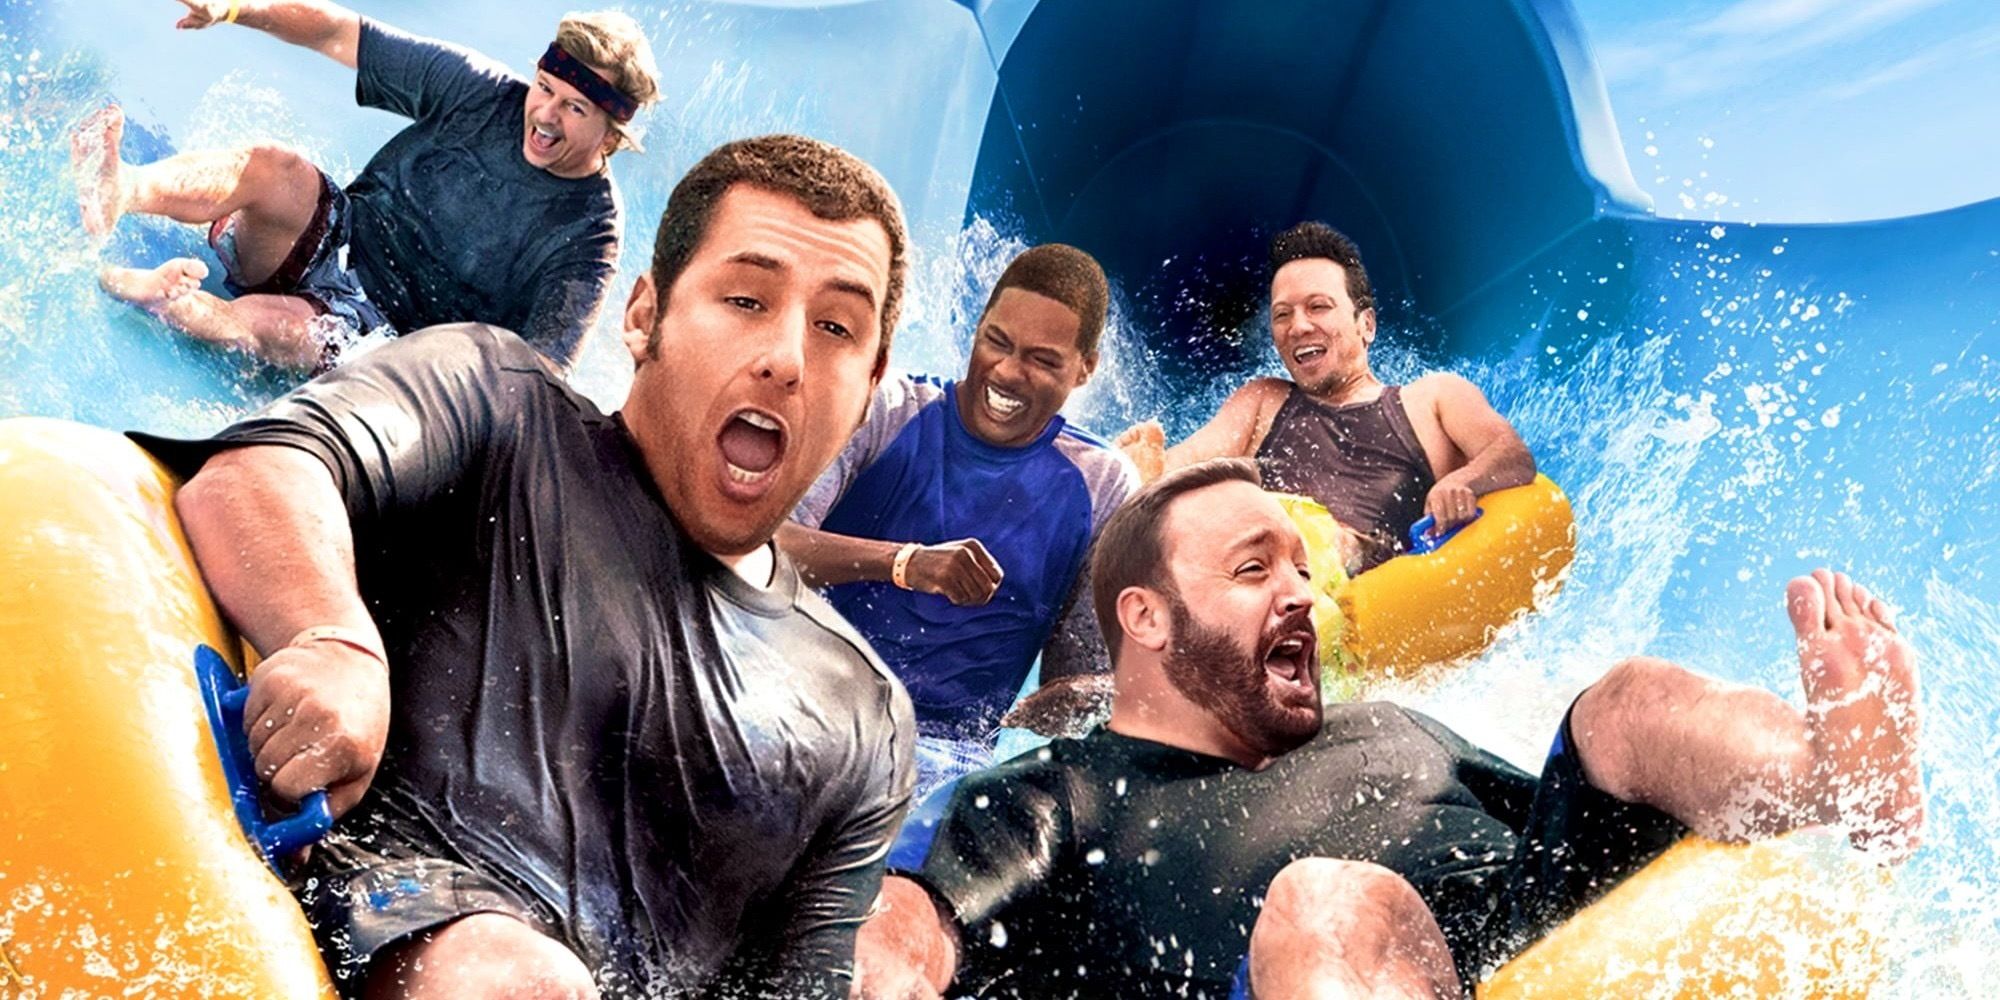 Grown Ups 3 Will It Happen? Everything We Know